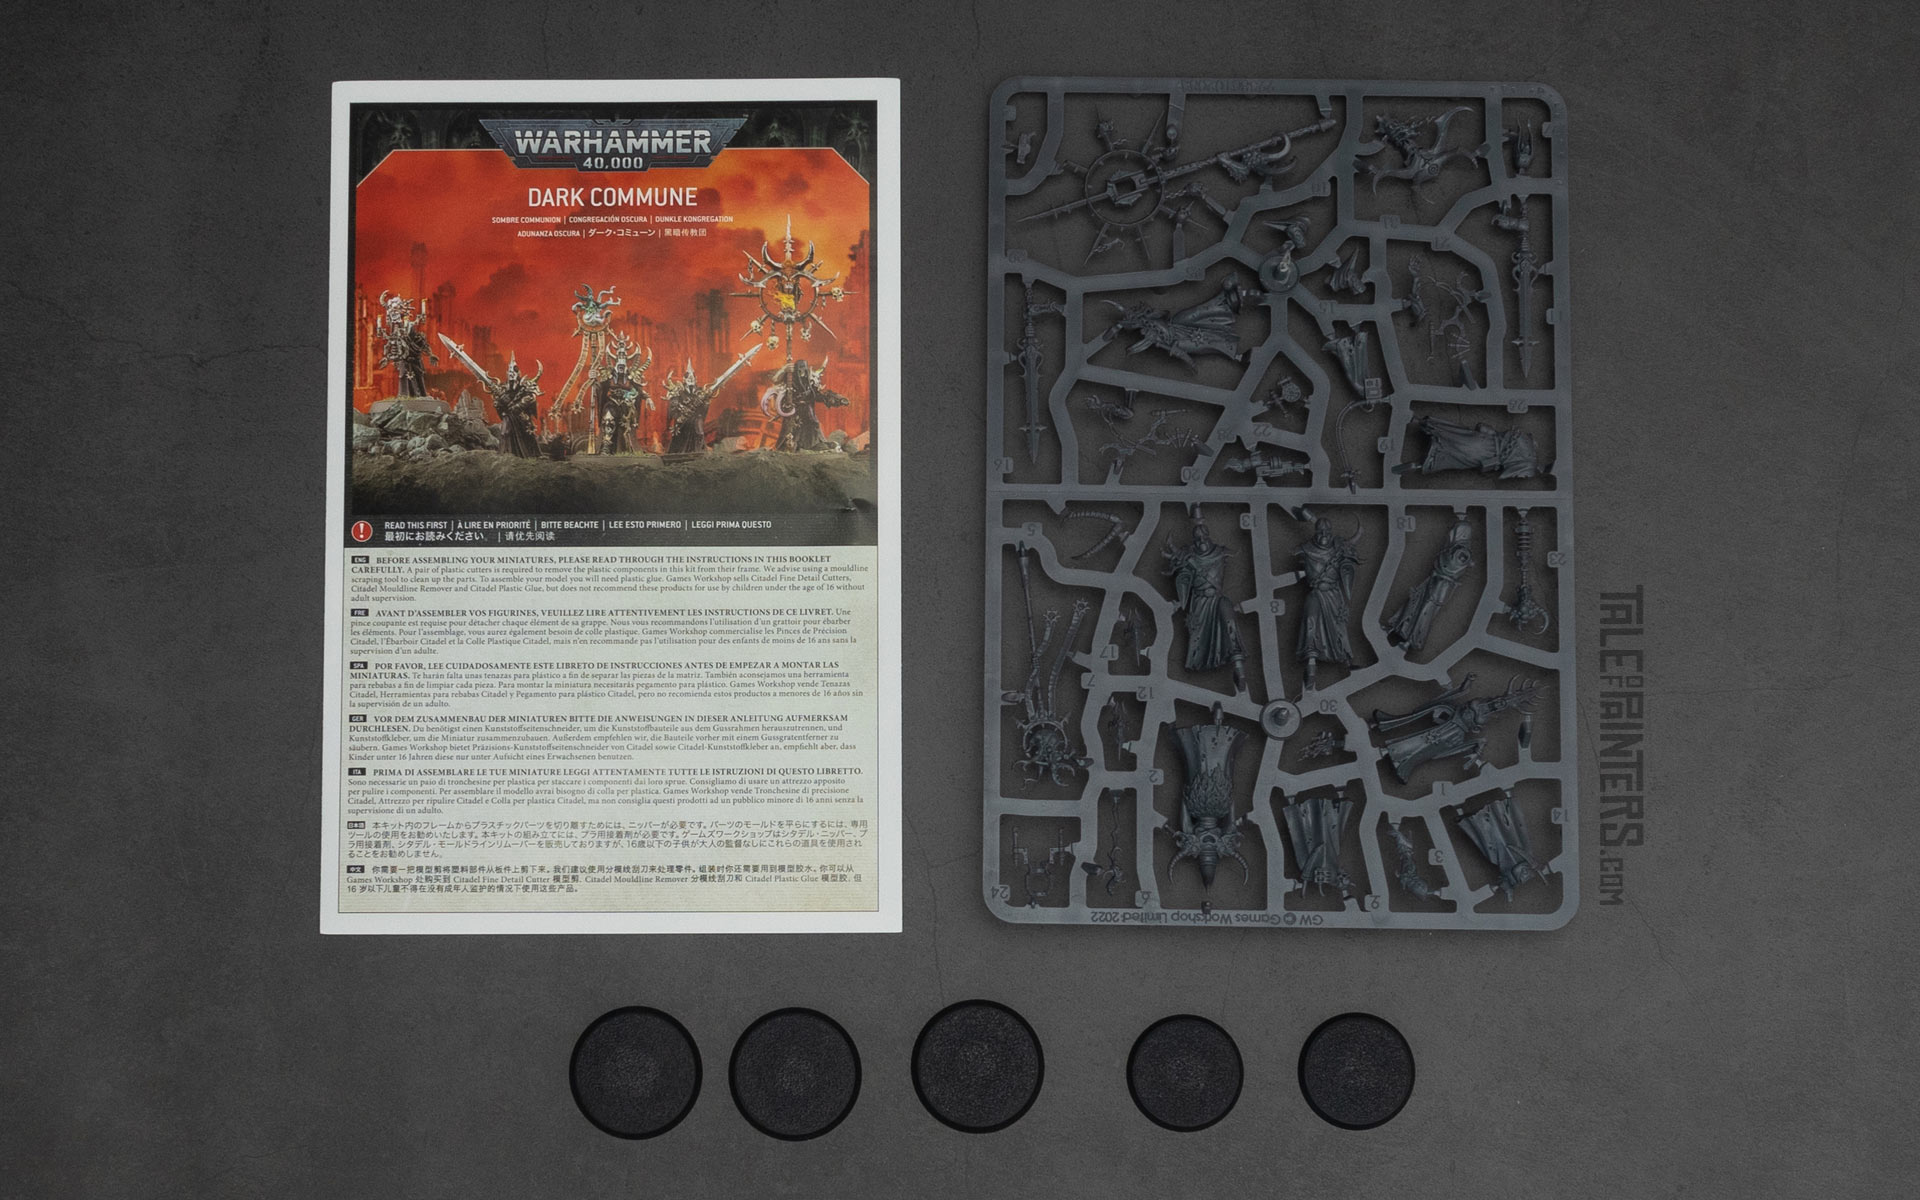 Chaos Space Marine Dark Commune unboxing and content